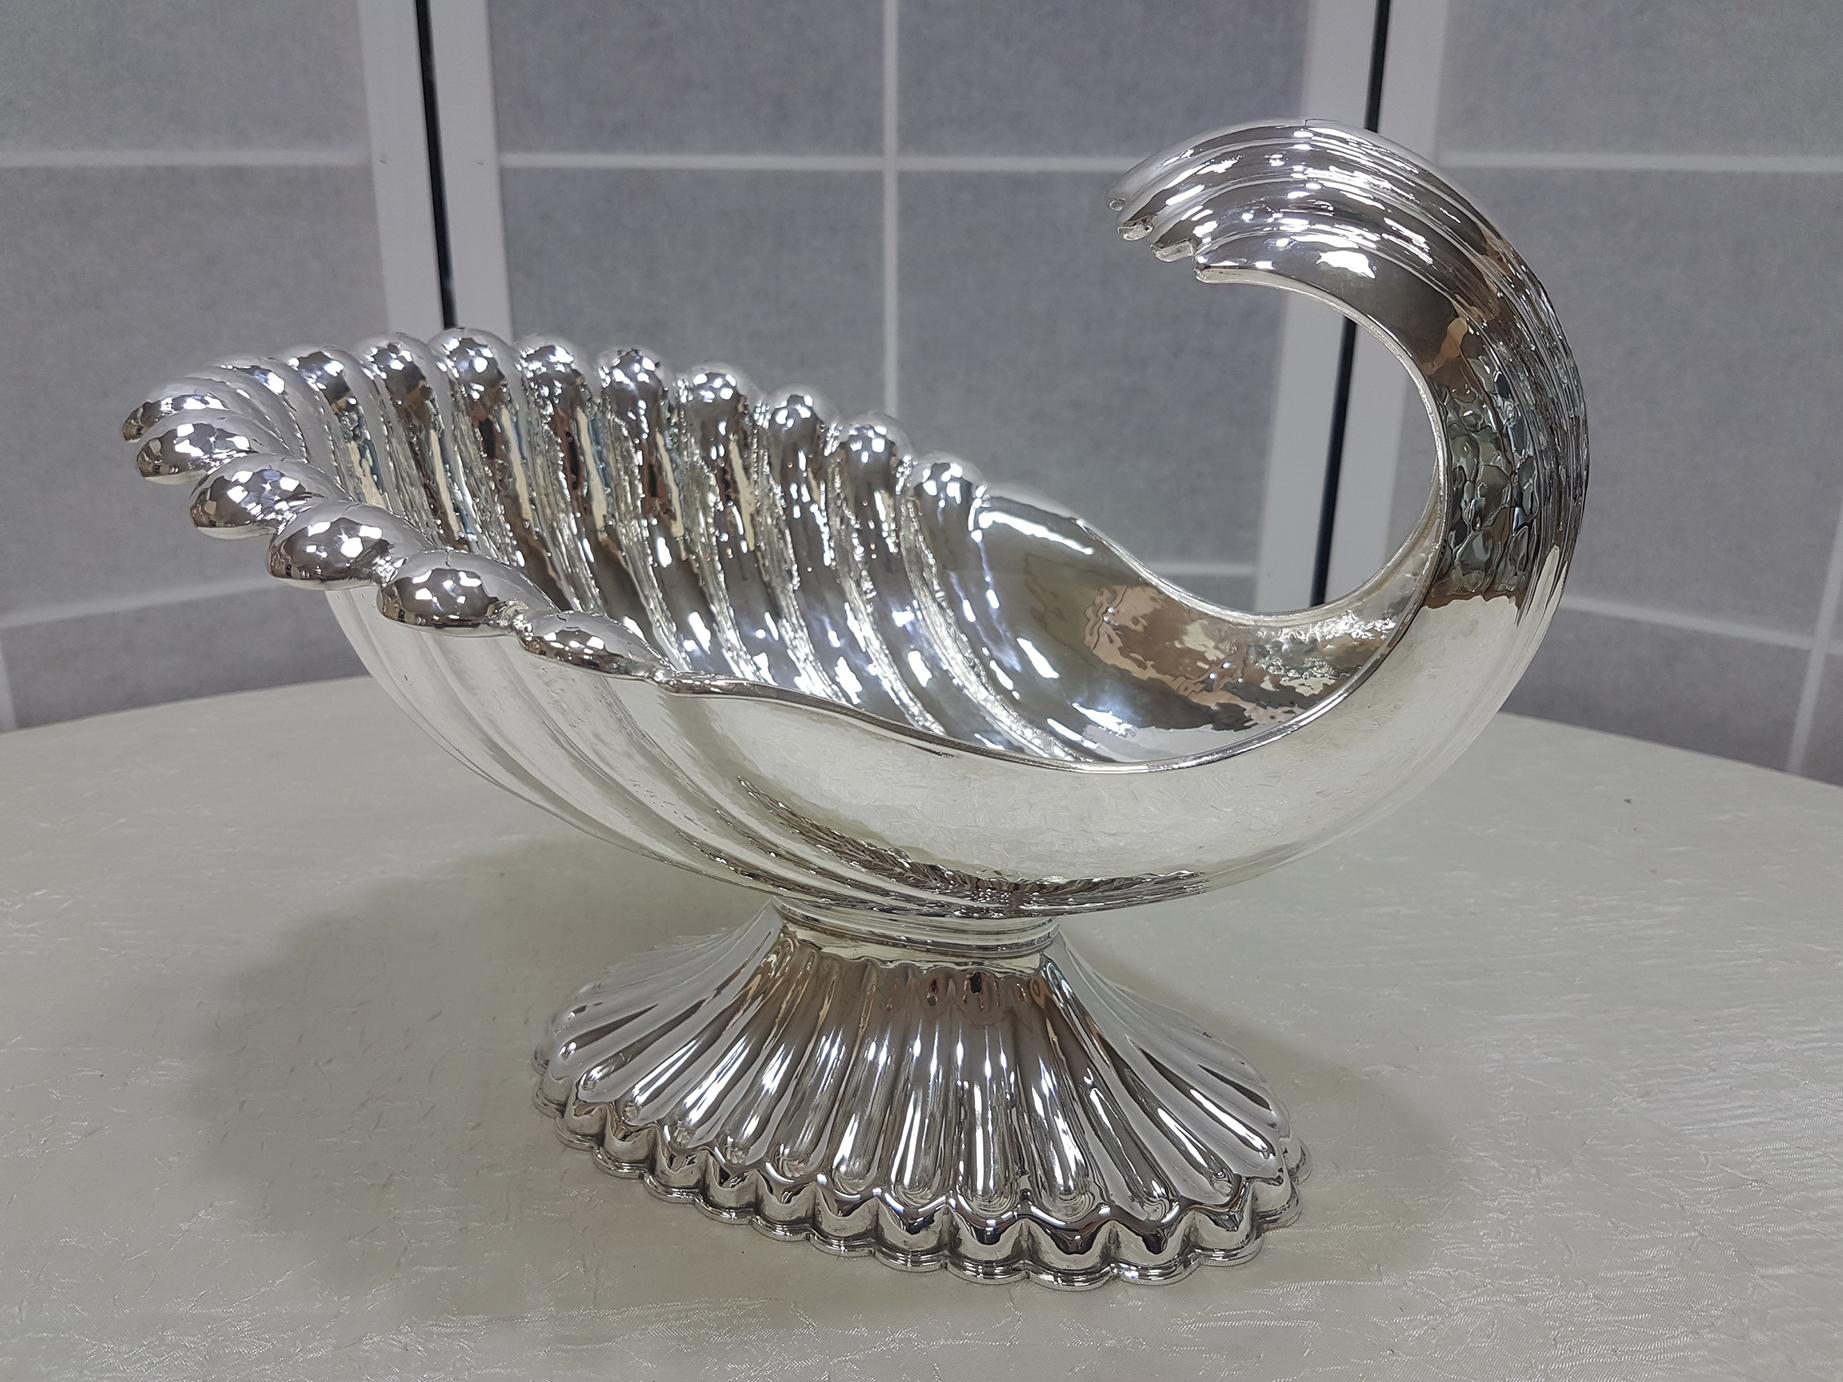 Shell-shaped oval centerpiece completely handmade with base, embossed and chisel finish.
Maker Silver Art - Alessandria, Italy
1,310 grams.